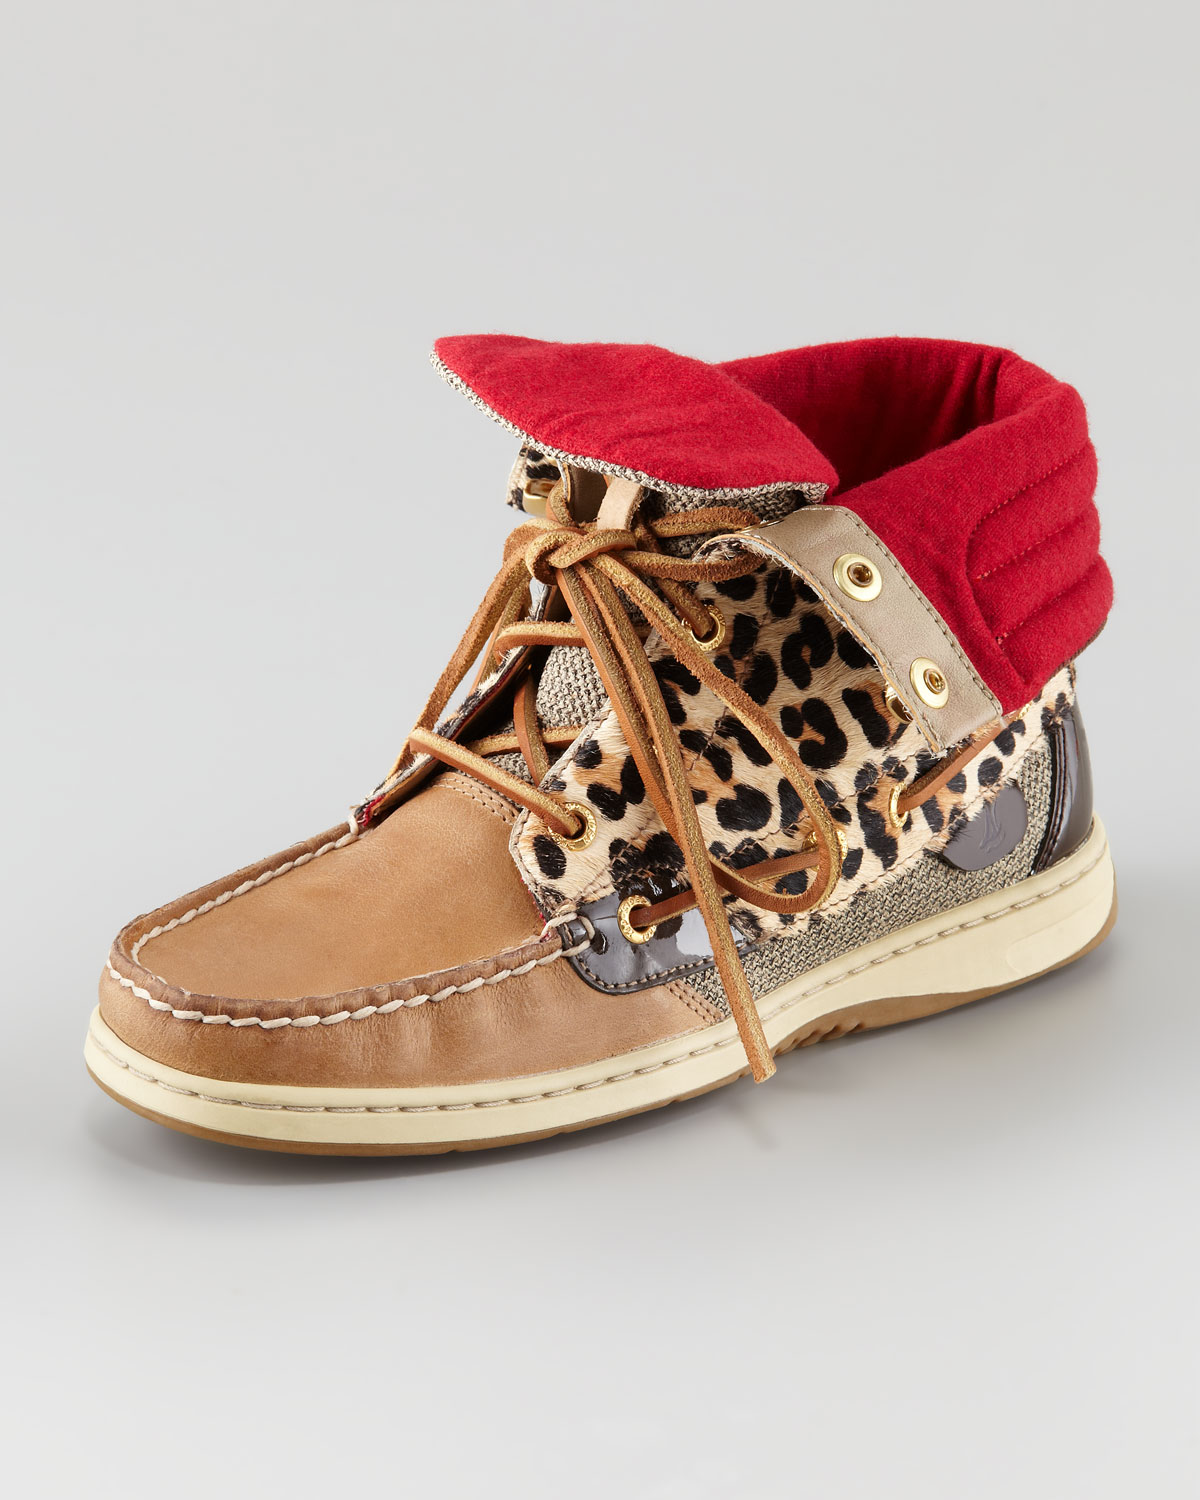 sperry leopard boots